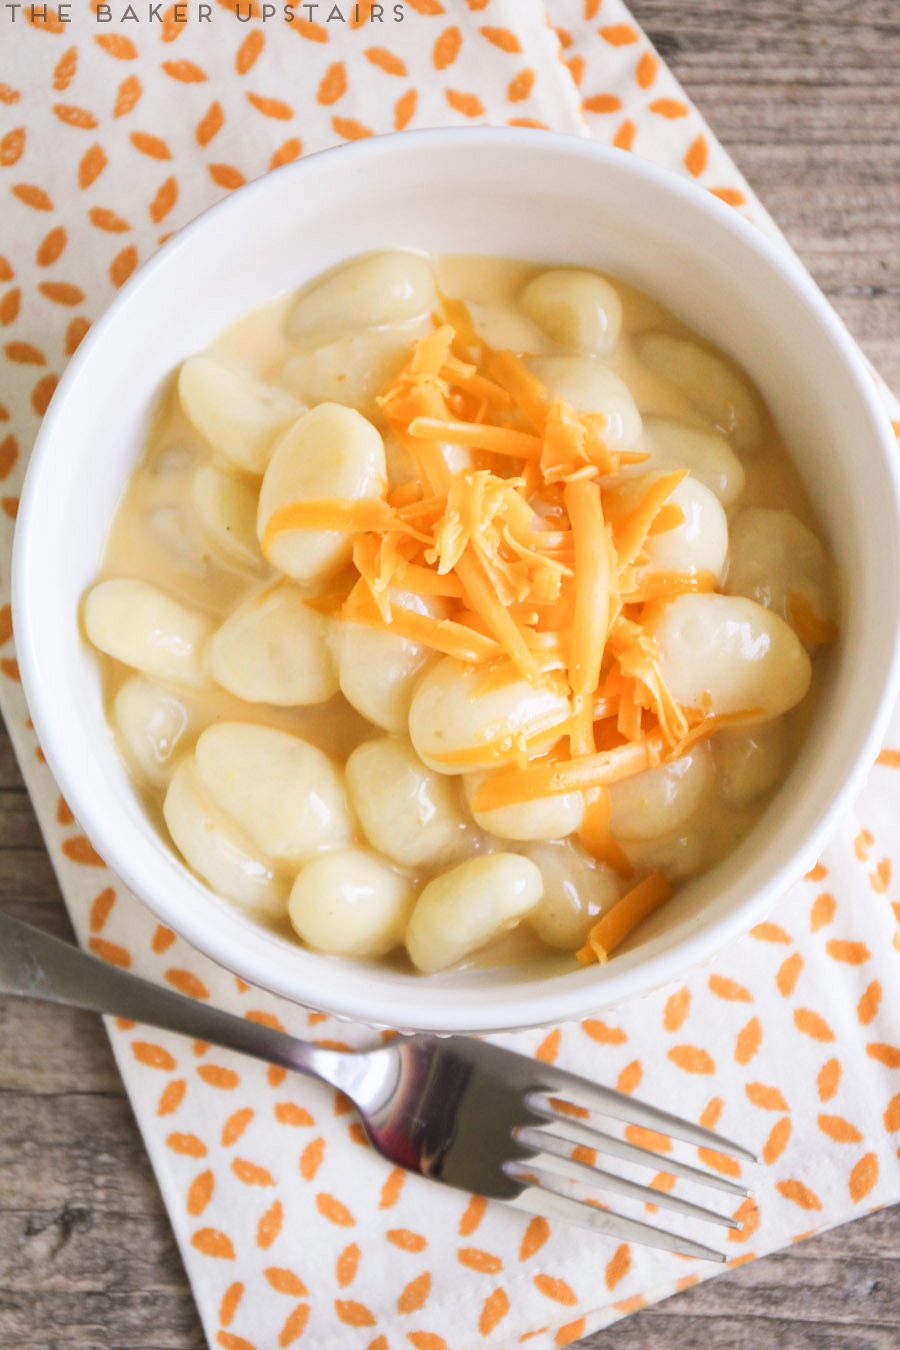 This gnocchi mac and cheese is so quick, cheesy, and delicious!